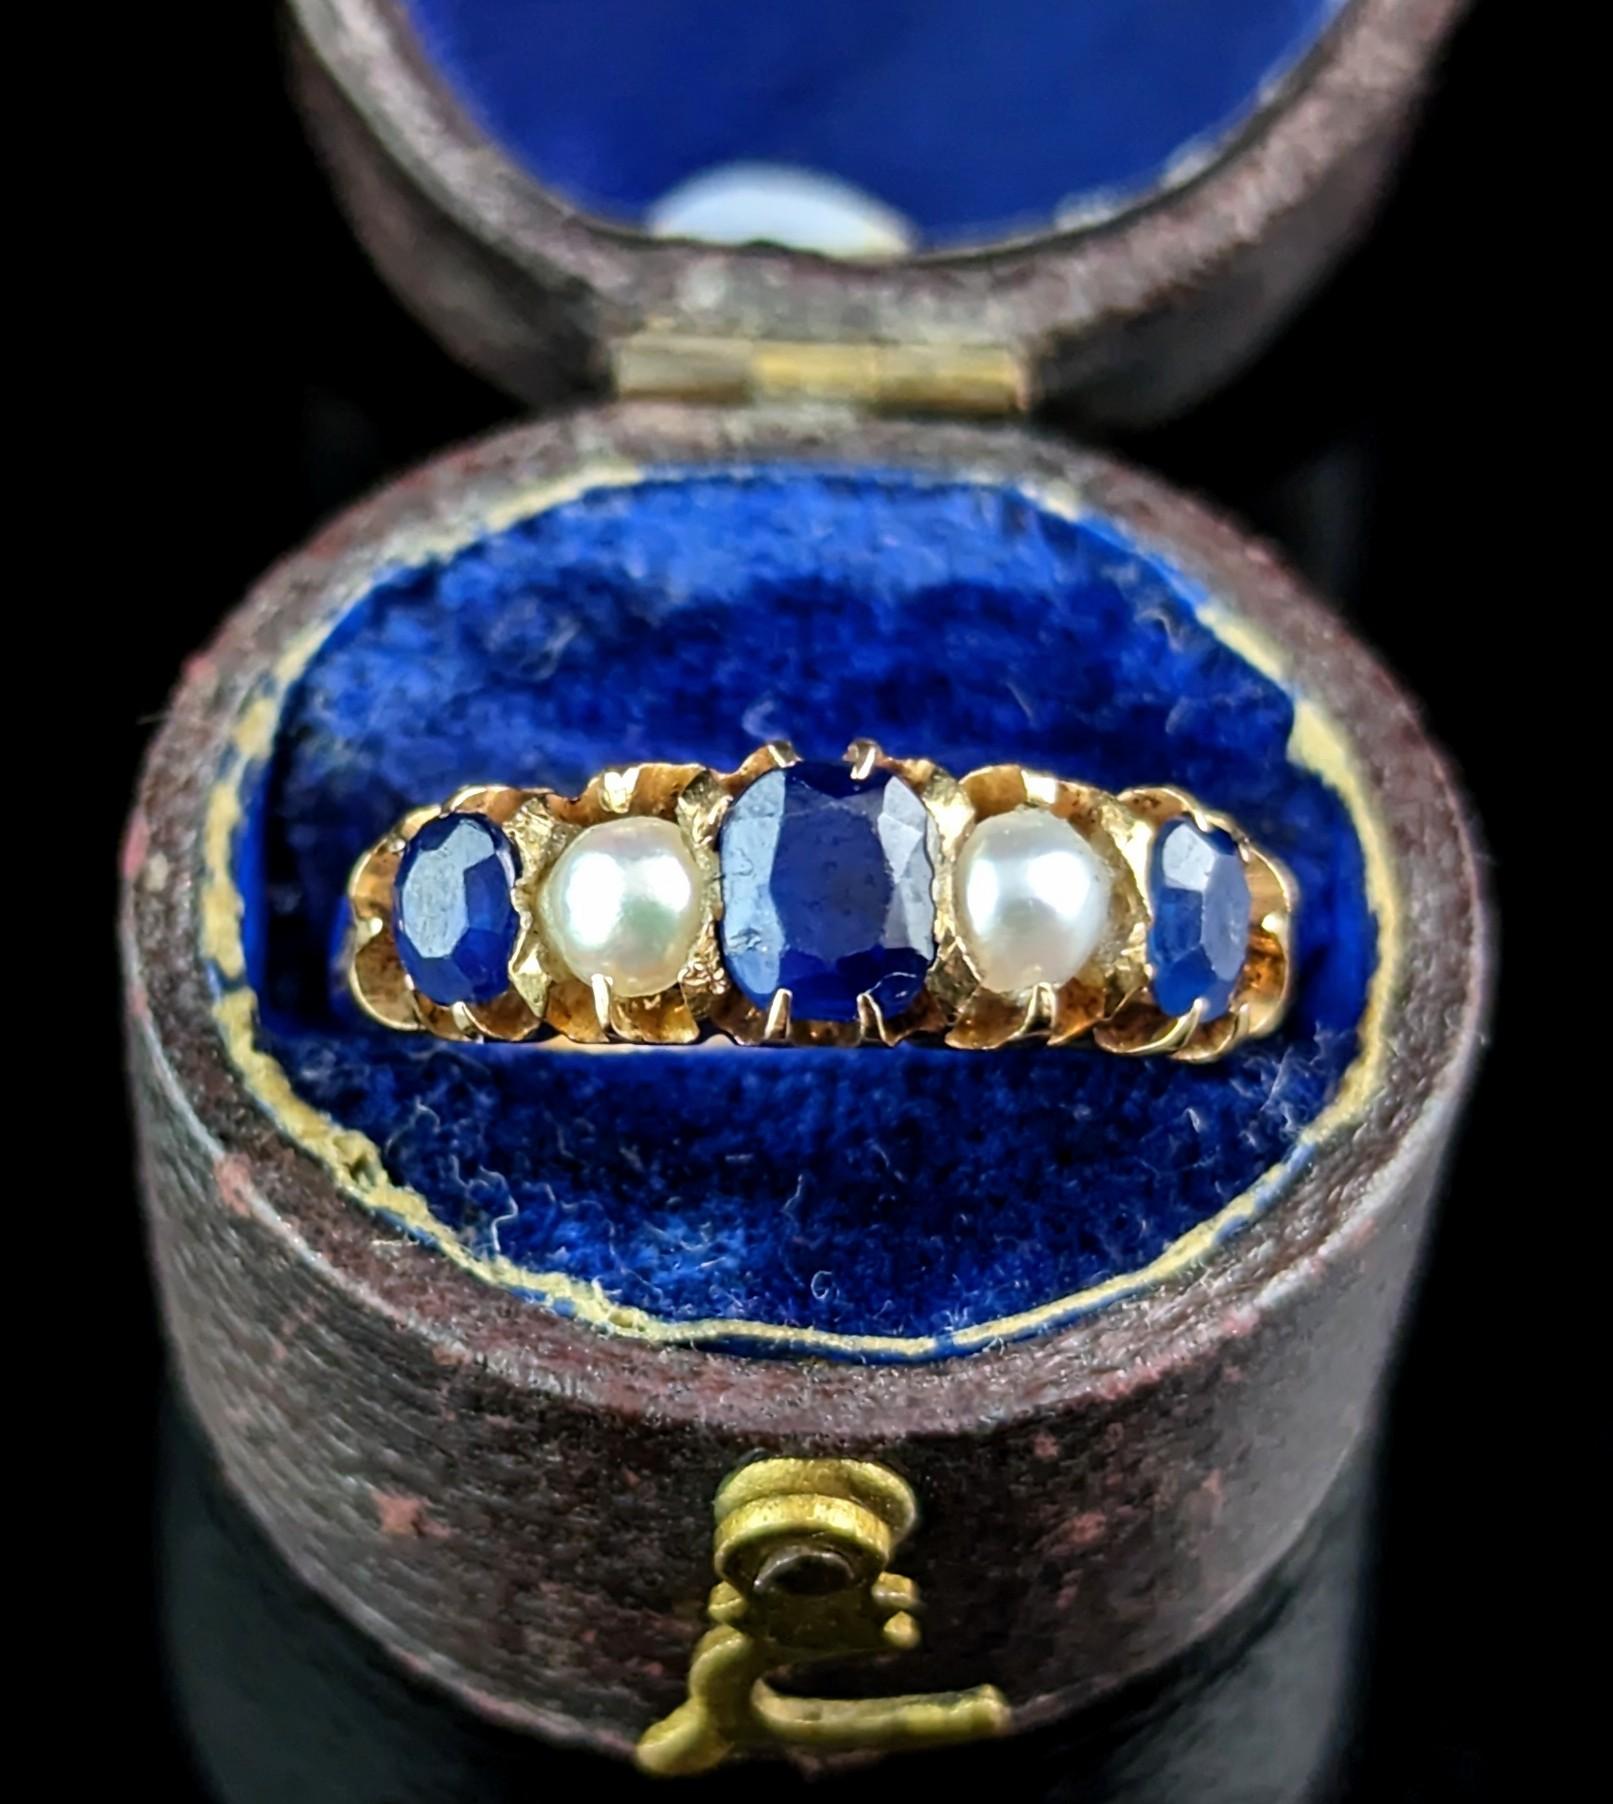 The Glorious Sapphires in this magnificent antique ring really are the showstoppers of this piece.

Such a beautiful and rich deep blue, a royal blue in a ring fit for a princess, the ring features three blue sapphires and two split pearls.

The